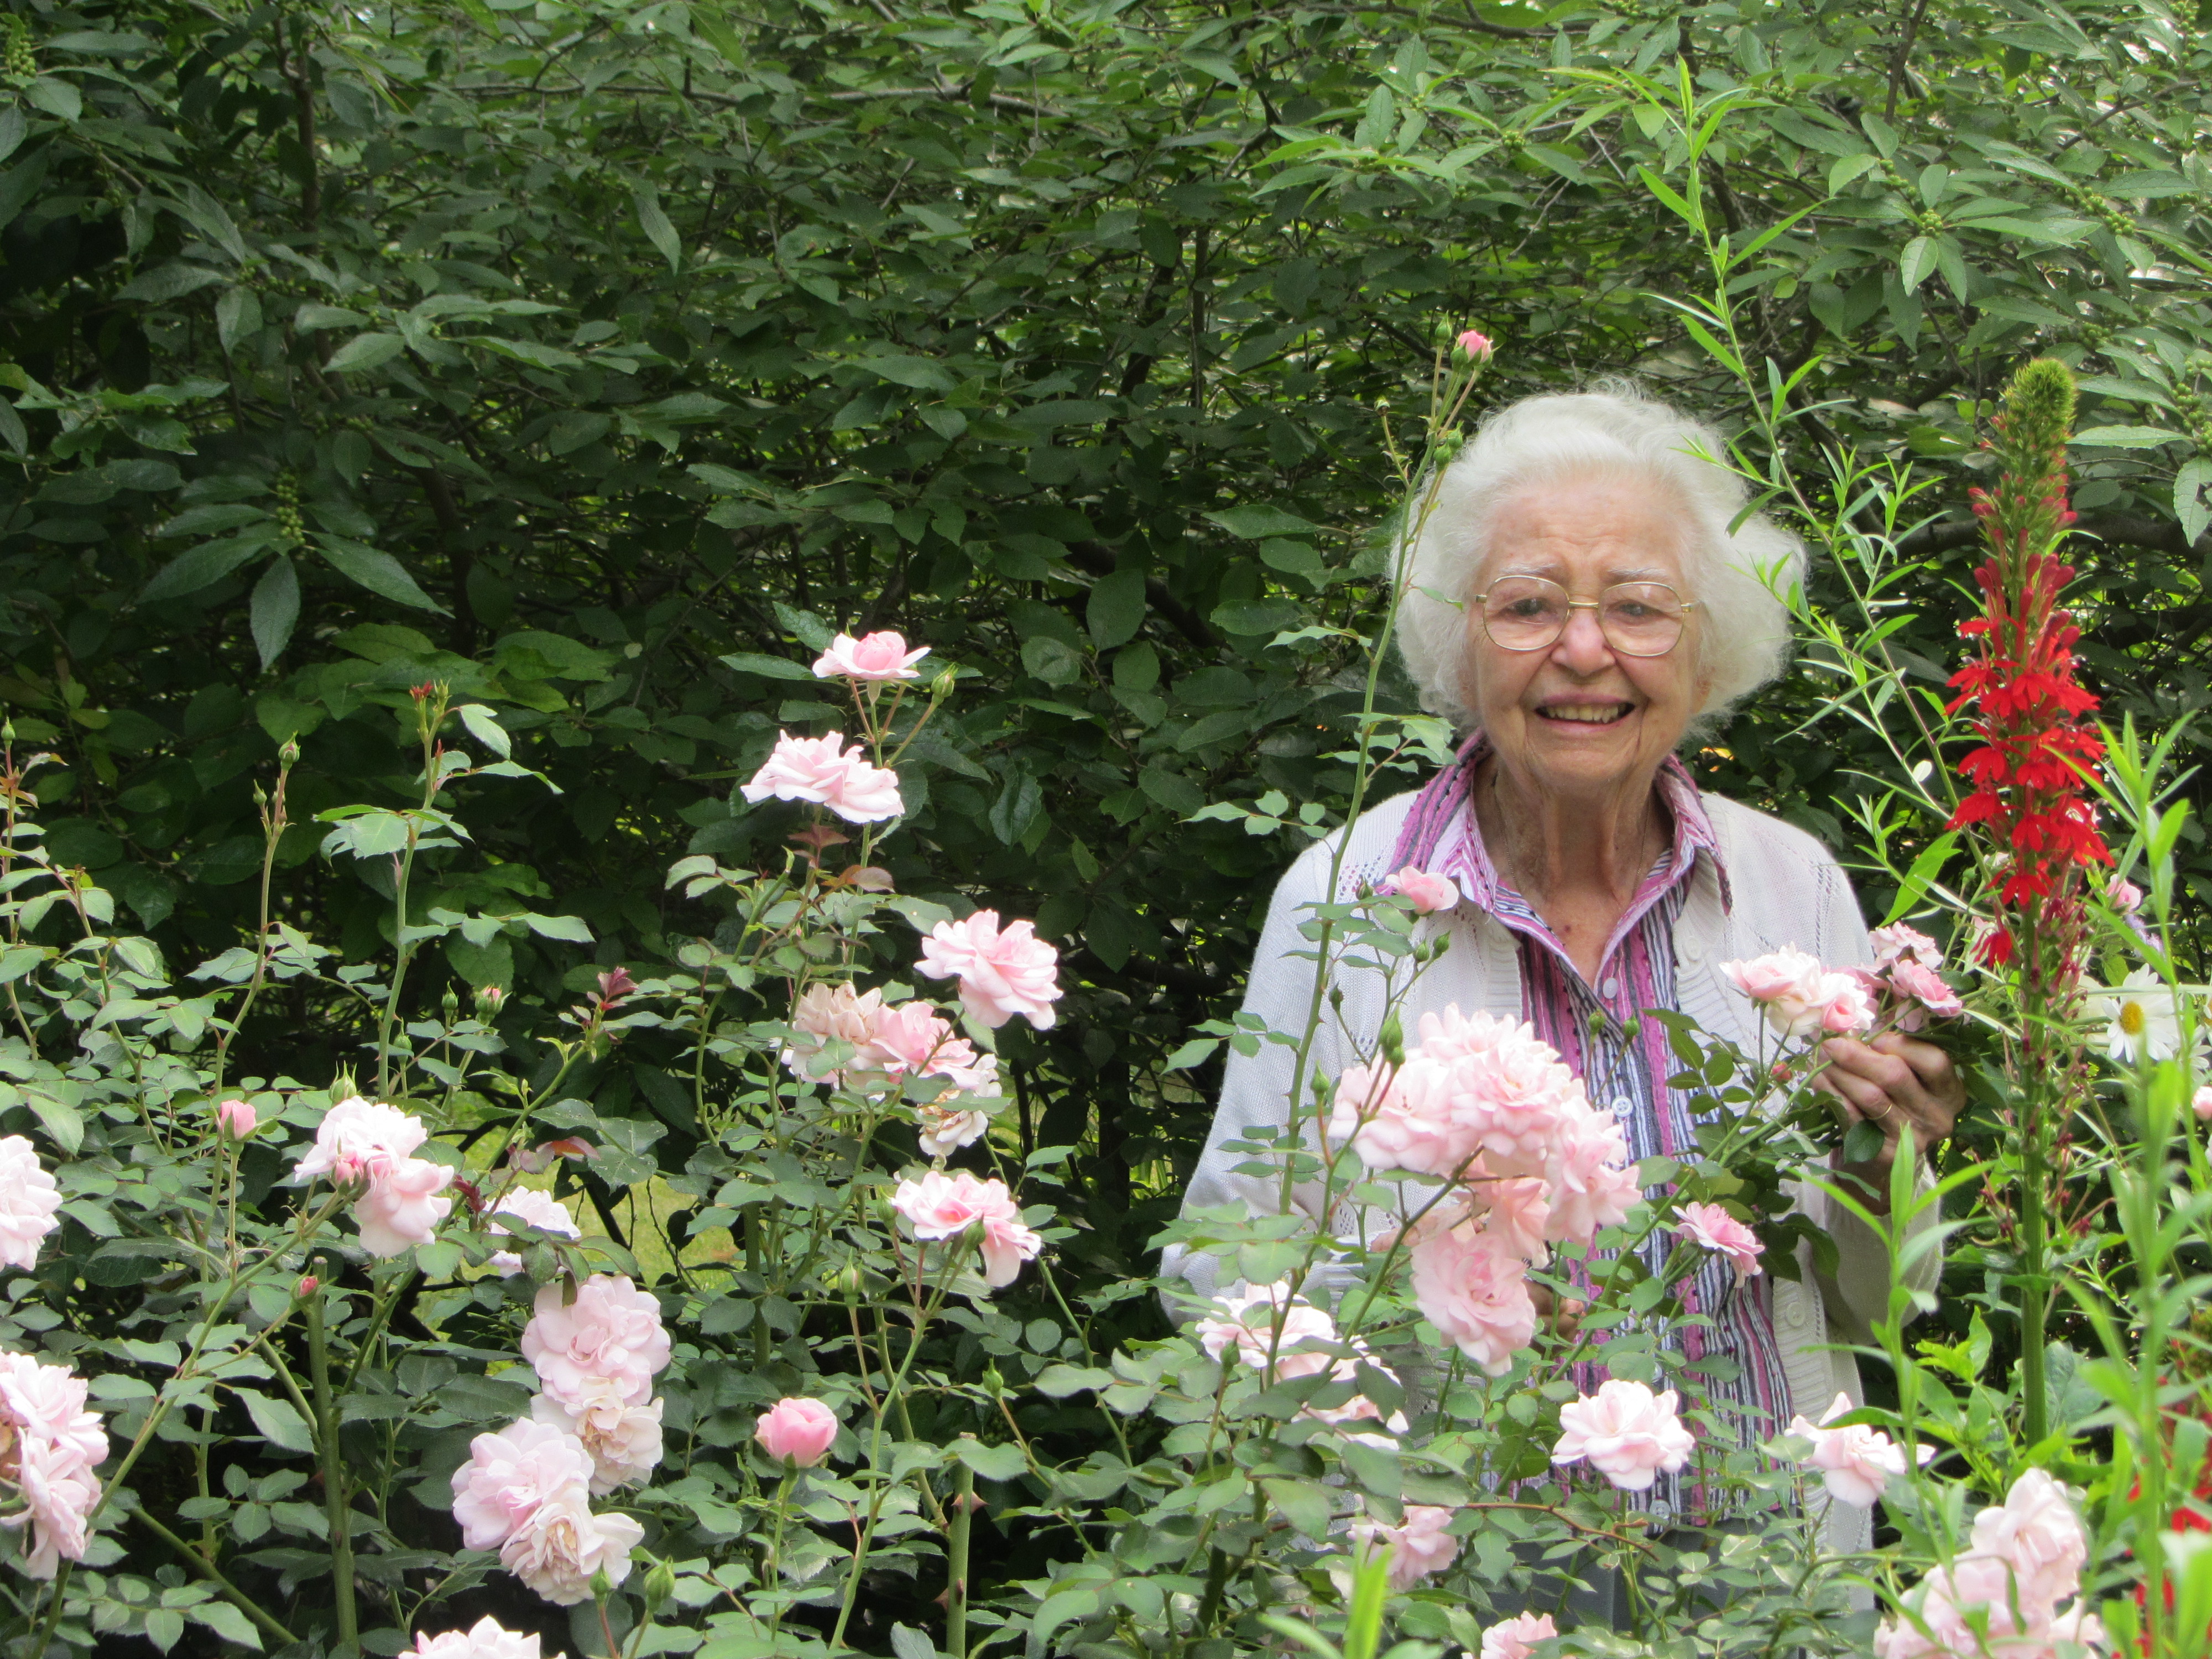 Margaret with her roses